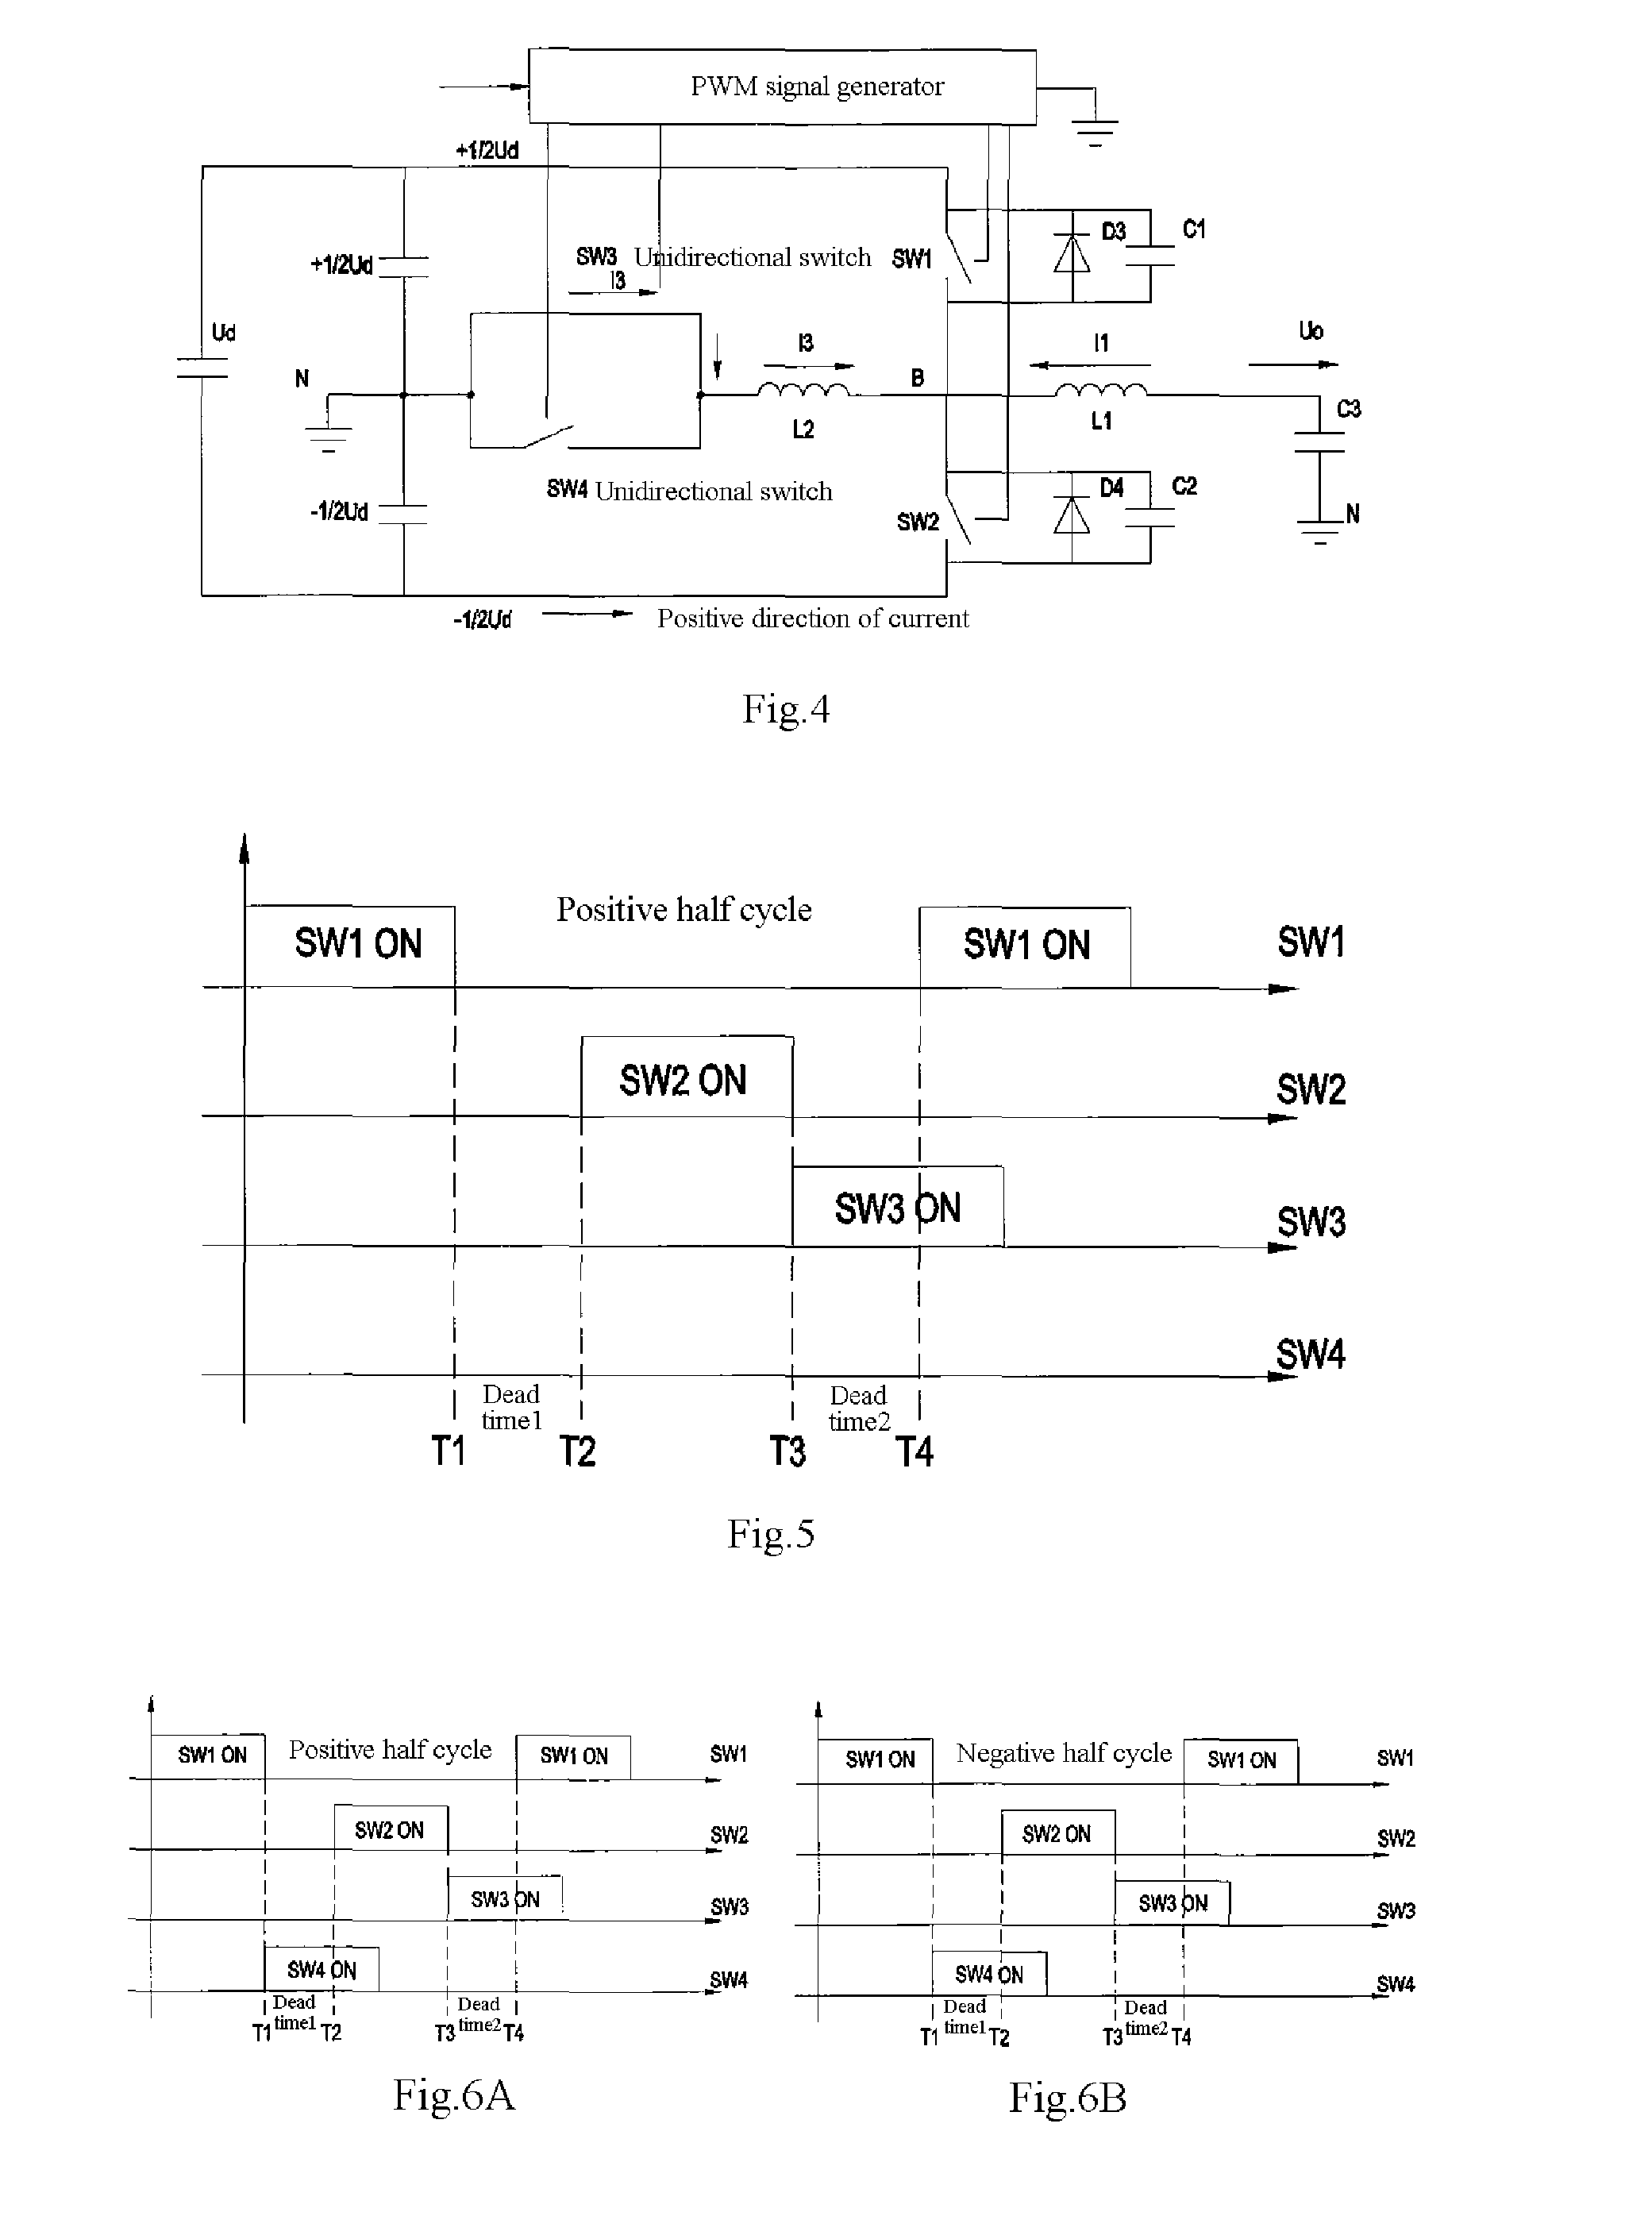 Control method for soft switch circuit in switch power supply